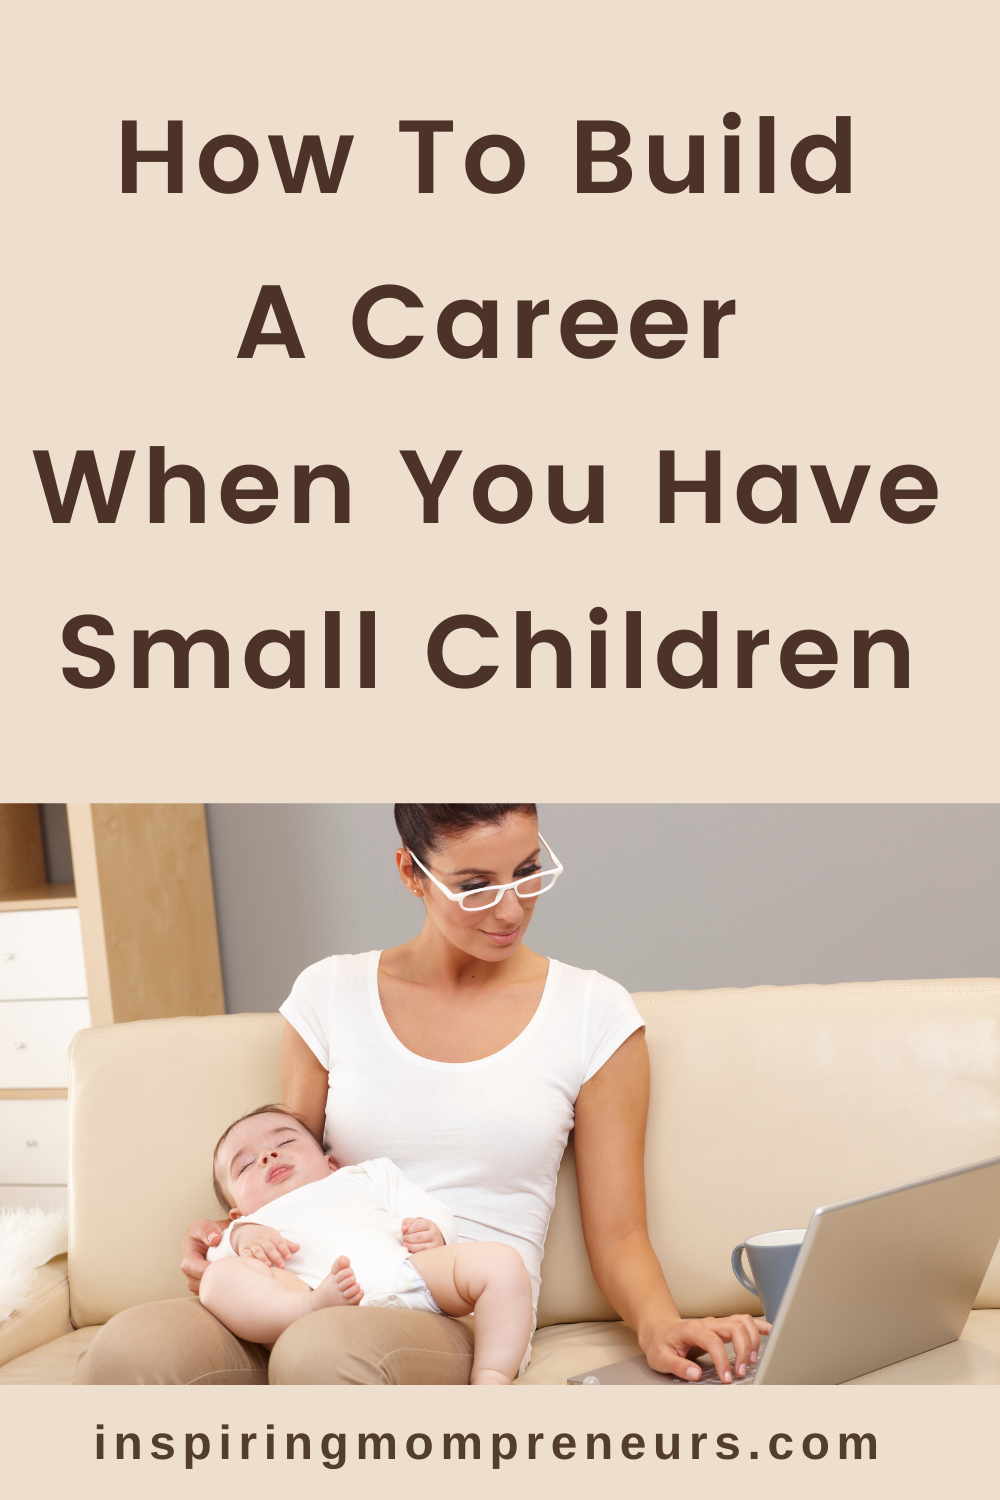 How To Build A Career When You Have Small Children